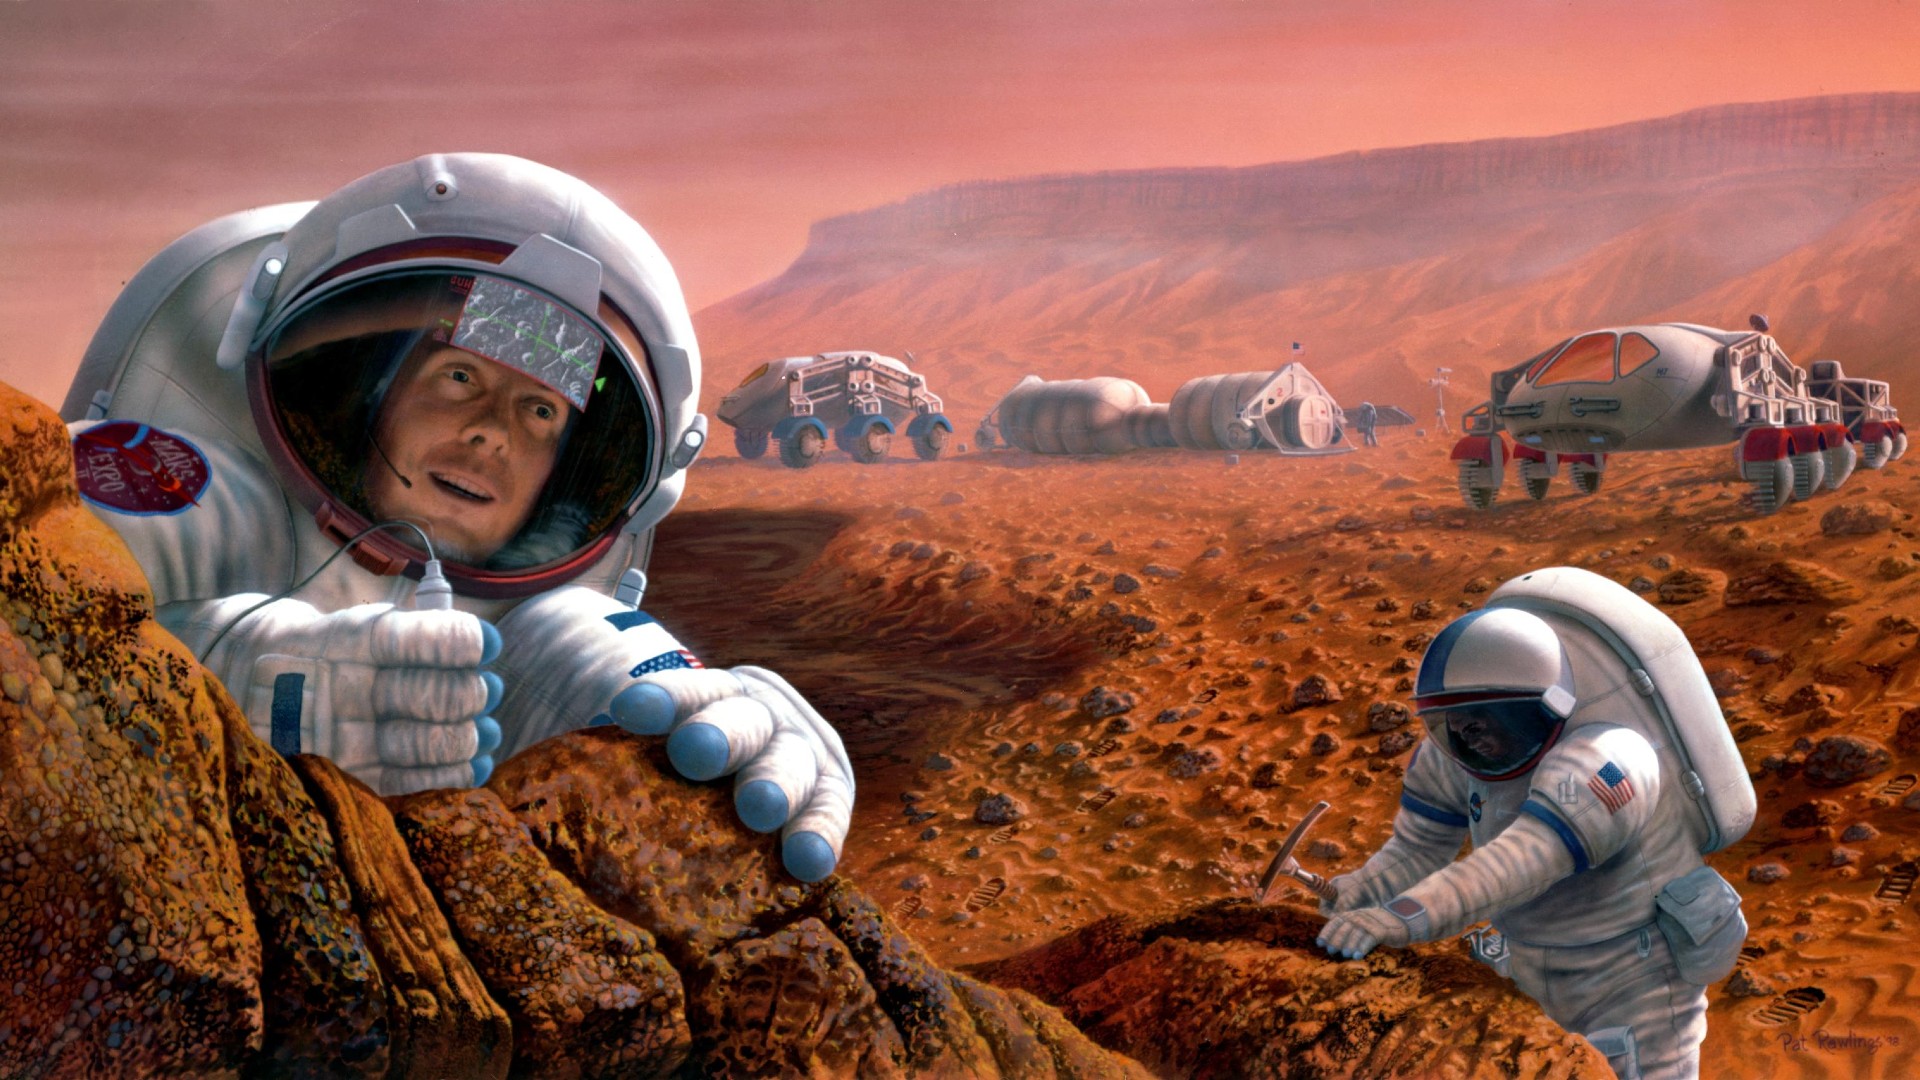 Humans on Mars could conduct far better science than any machine Space